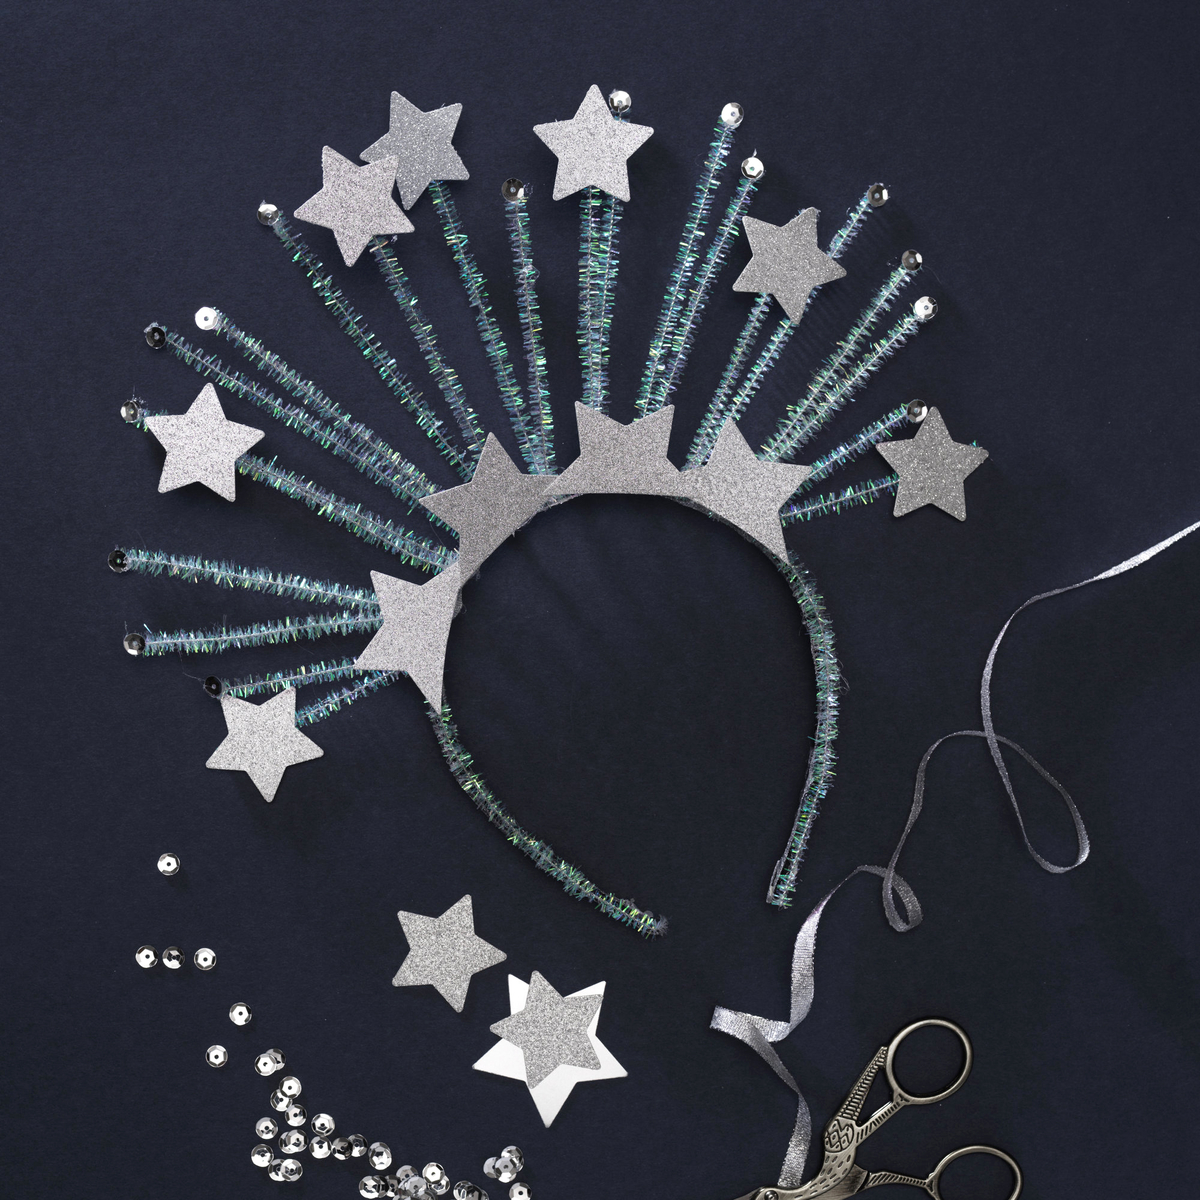 Make your own New Year's Eve headband